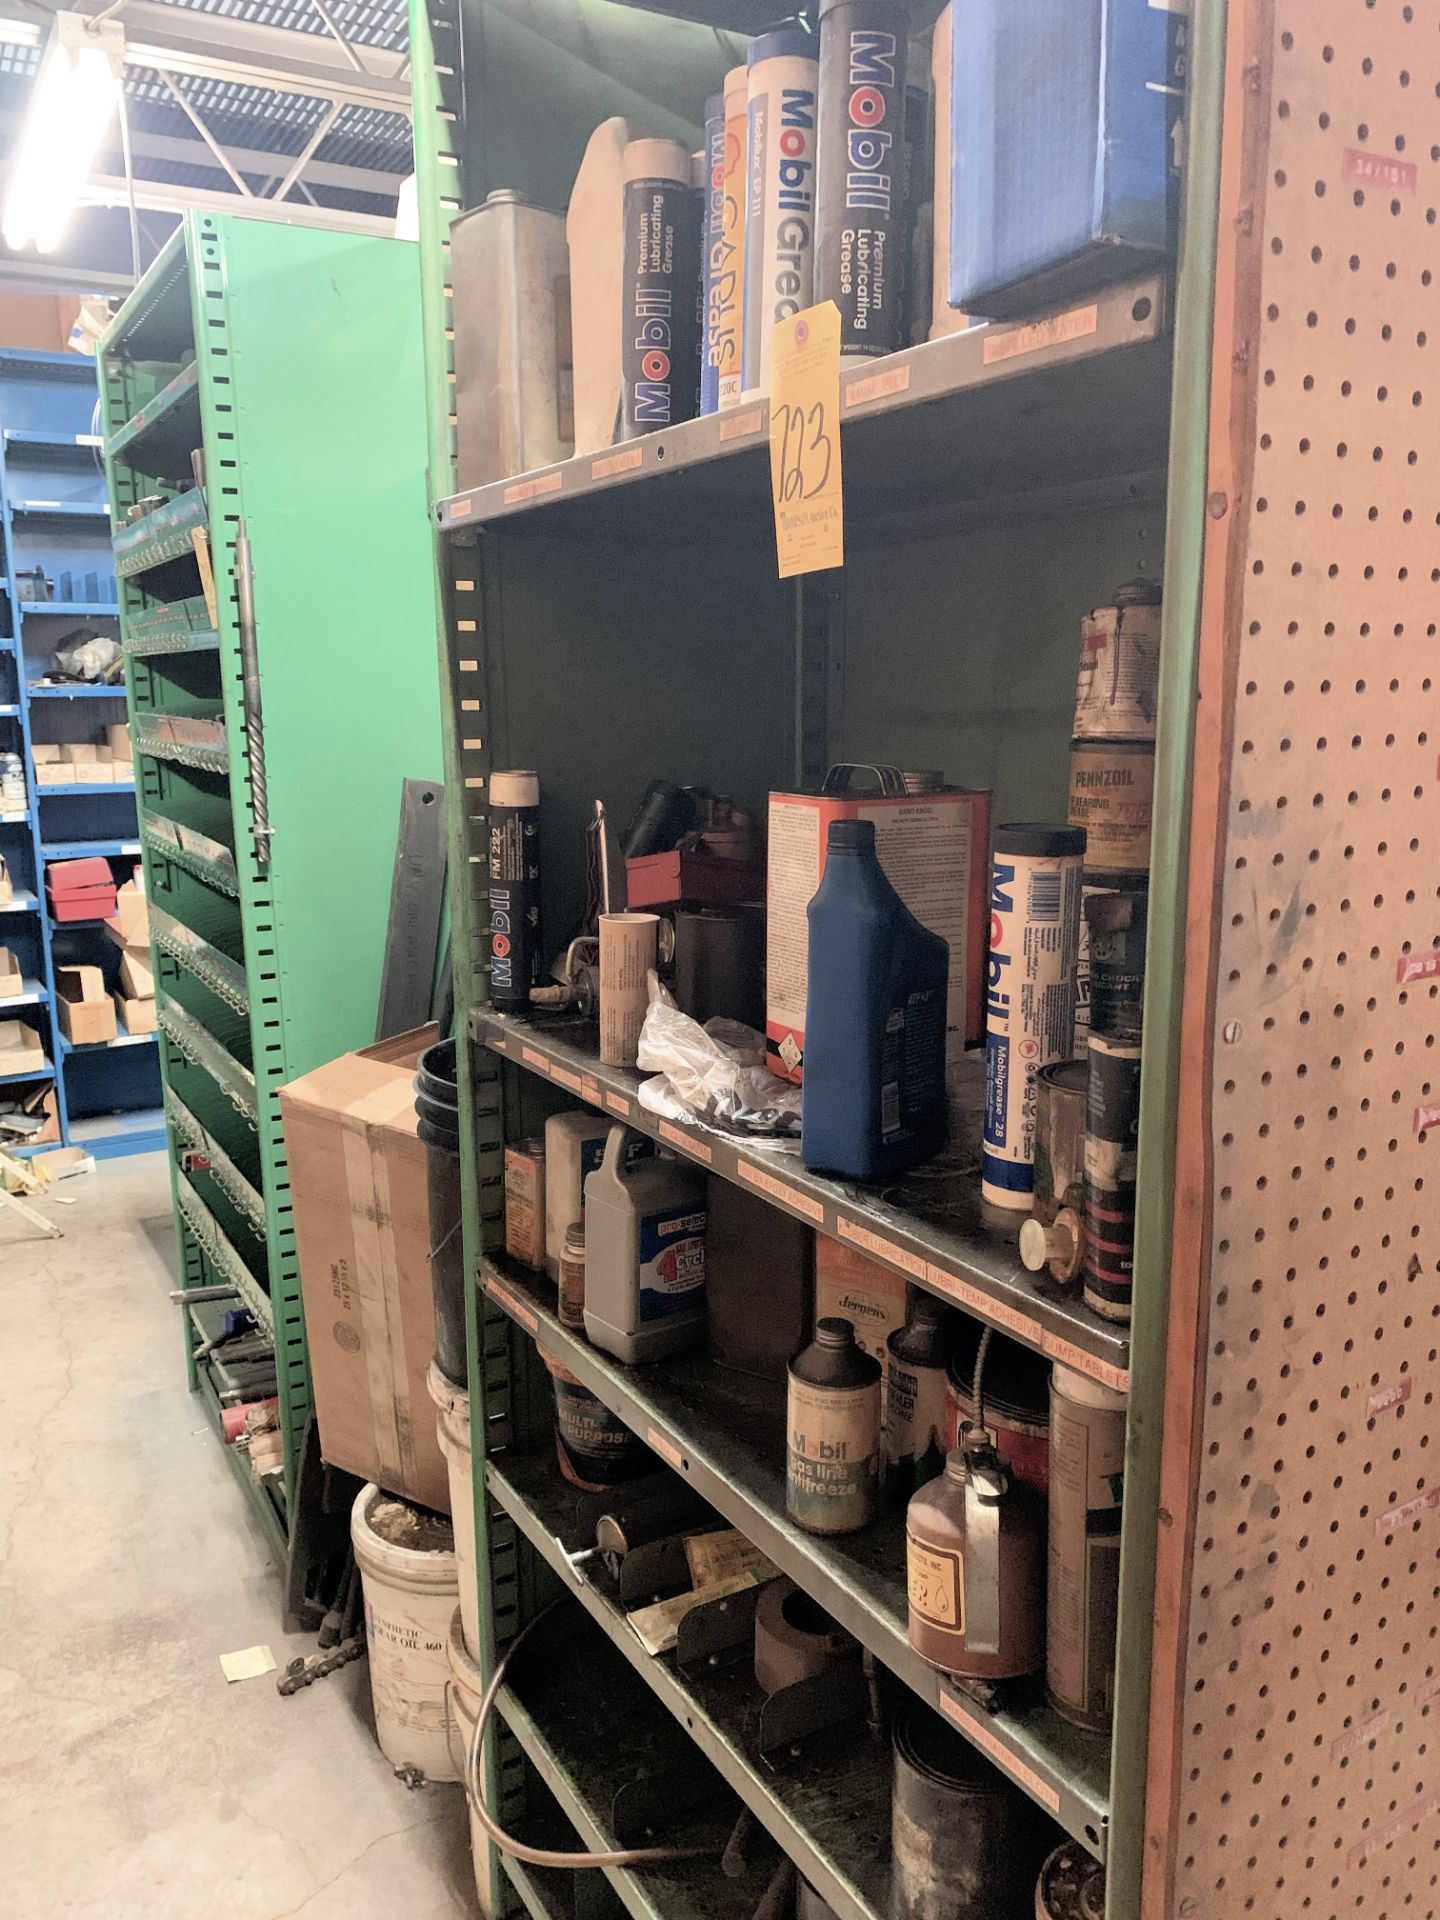 Lot-(5) Sections Shelving/Bin Organizer Cabinets with Collets, Anchors, Holders, Lubricants, Drills, - Image 4 of 4